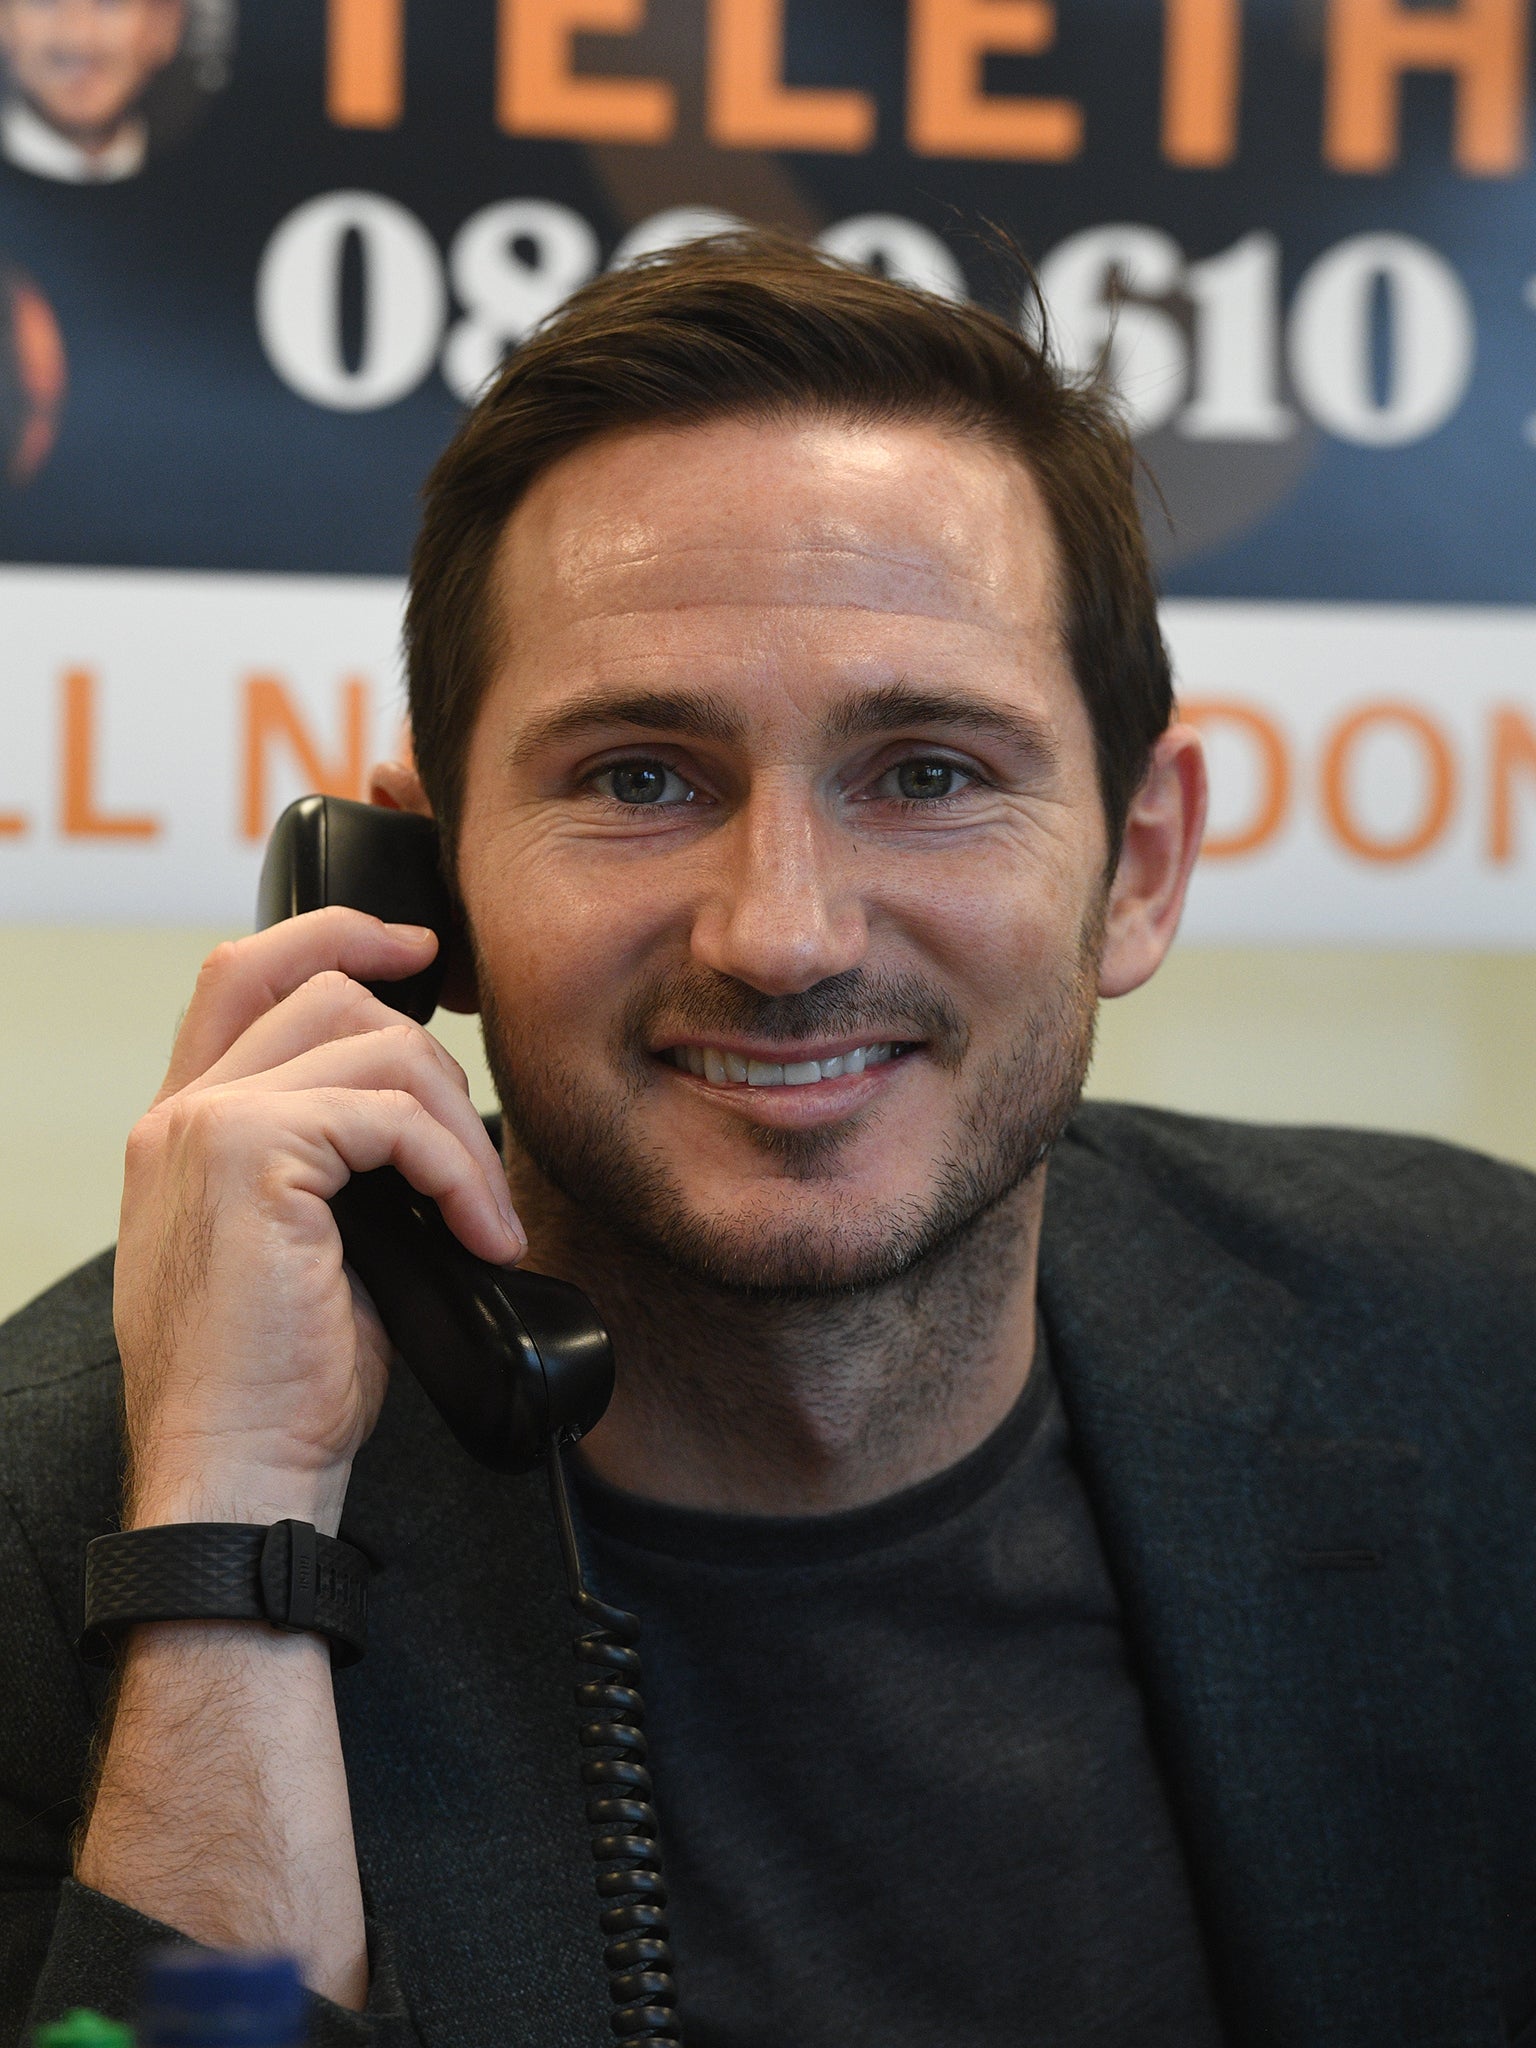 Frank Lampard at the Help a Hungry Child Telethon